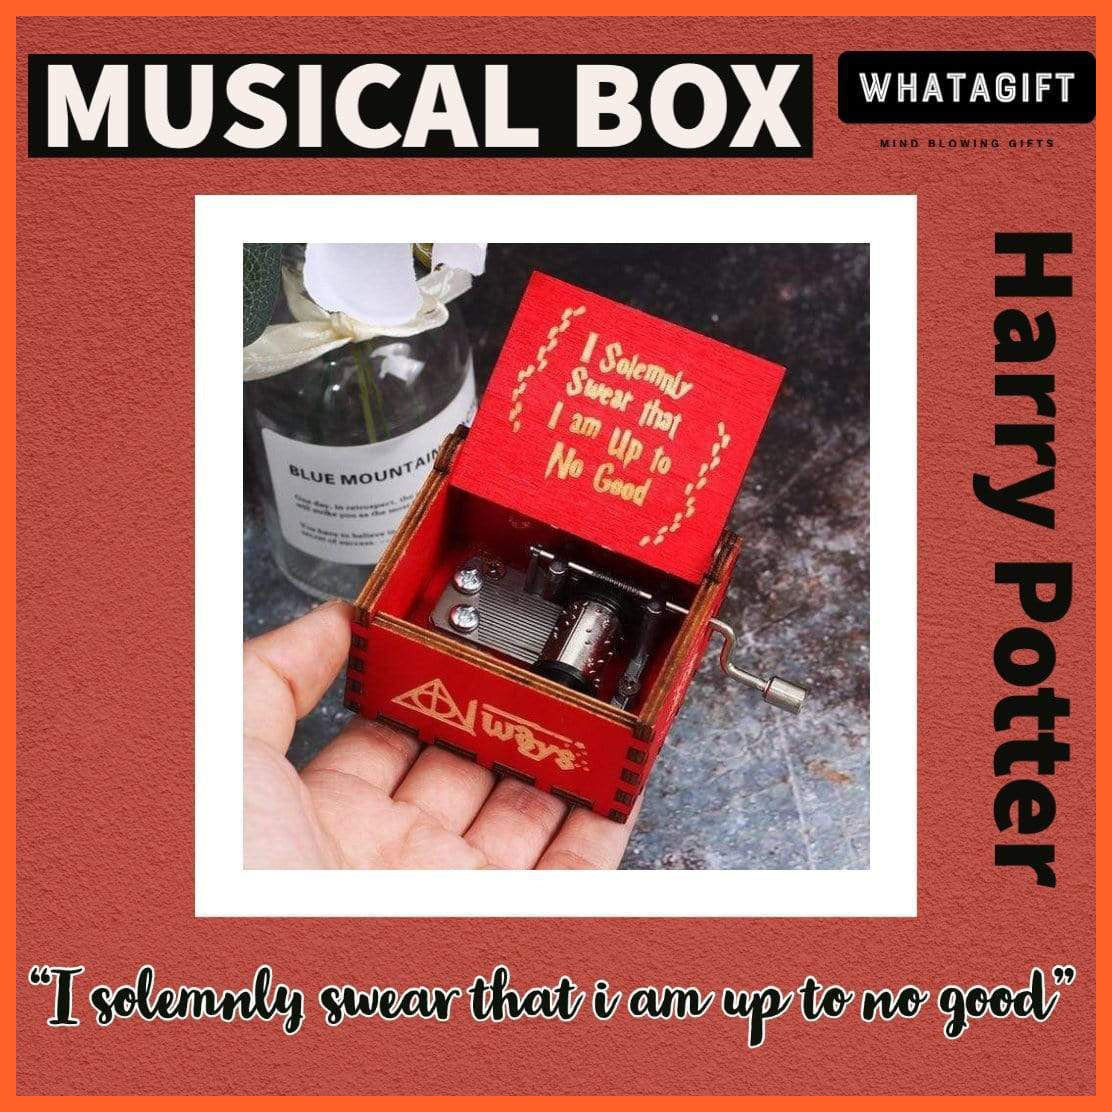 Wooden Classical Music Box Tune I Solemnly Swear Harry Potter | whatagift.com.au.